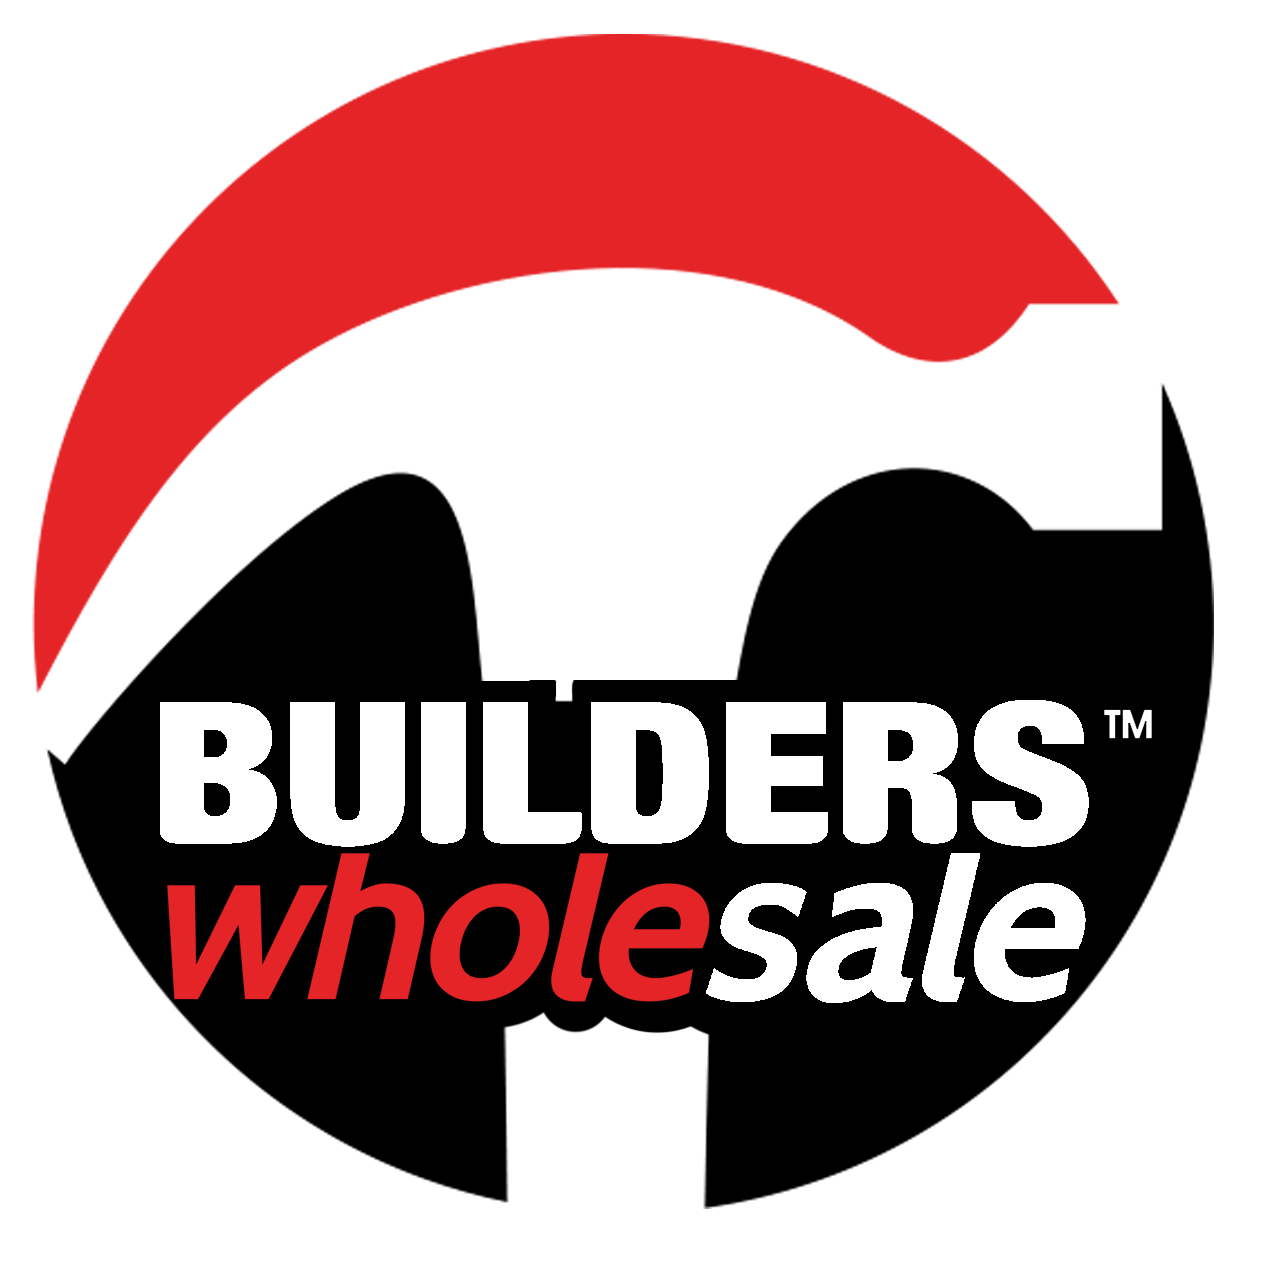 Filling the needs of general contractors with a full line of power tools, hand tools, nails & fasteners, windstorm connectors, and building products.